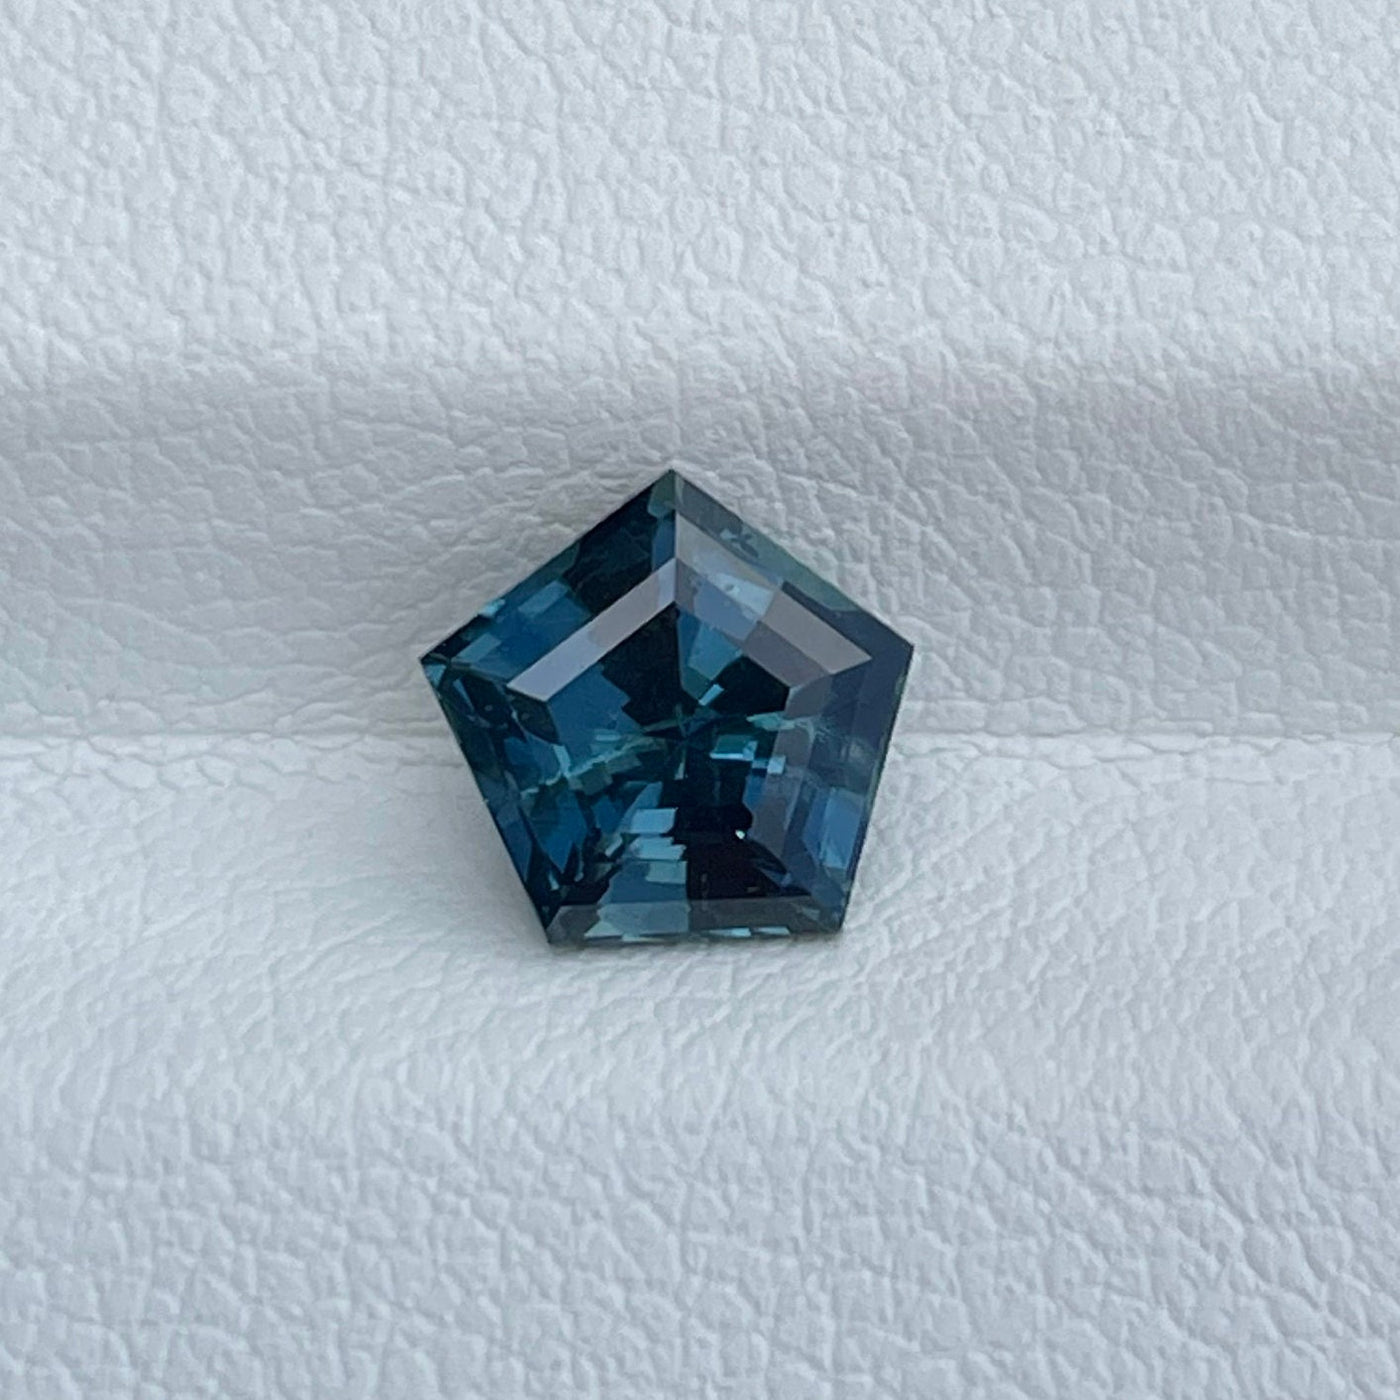 Teal Sapphire  1.58 Ct